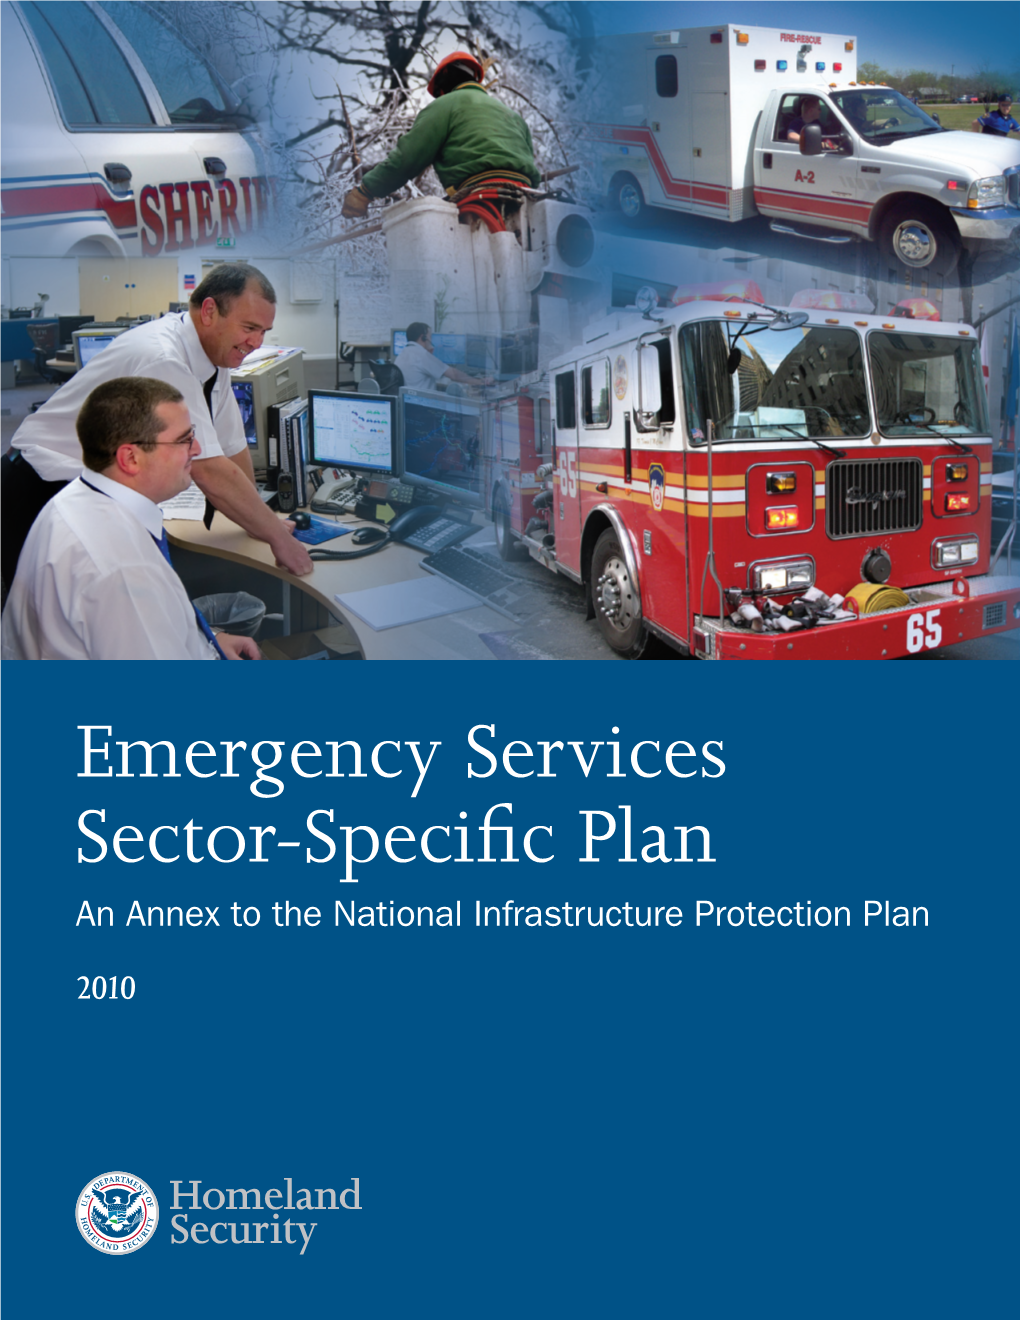 Emergency Services Sector-Specific Plan 2010